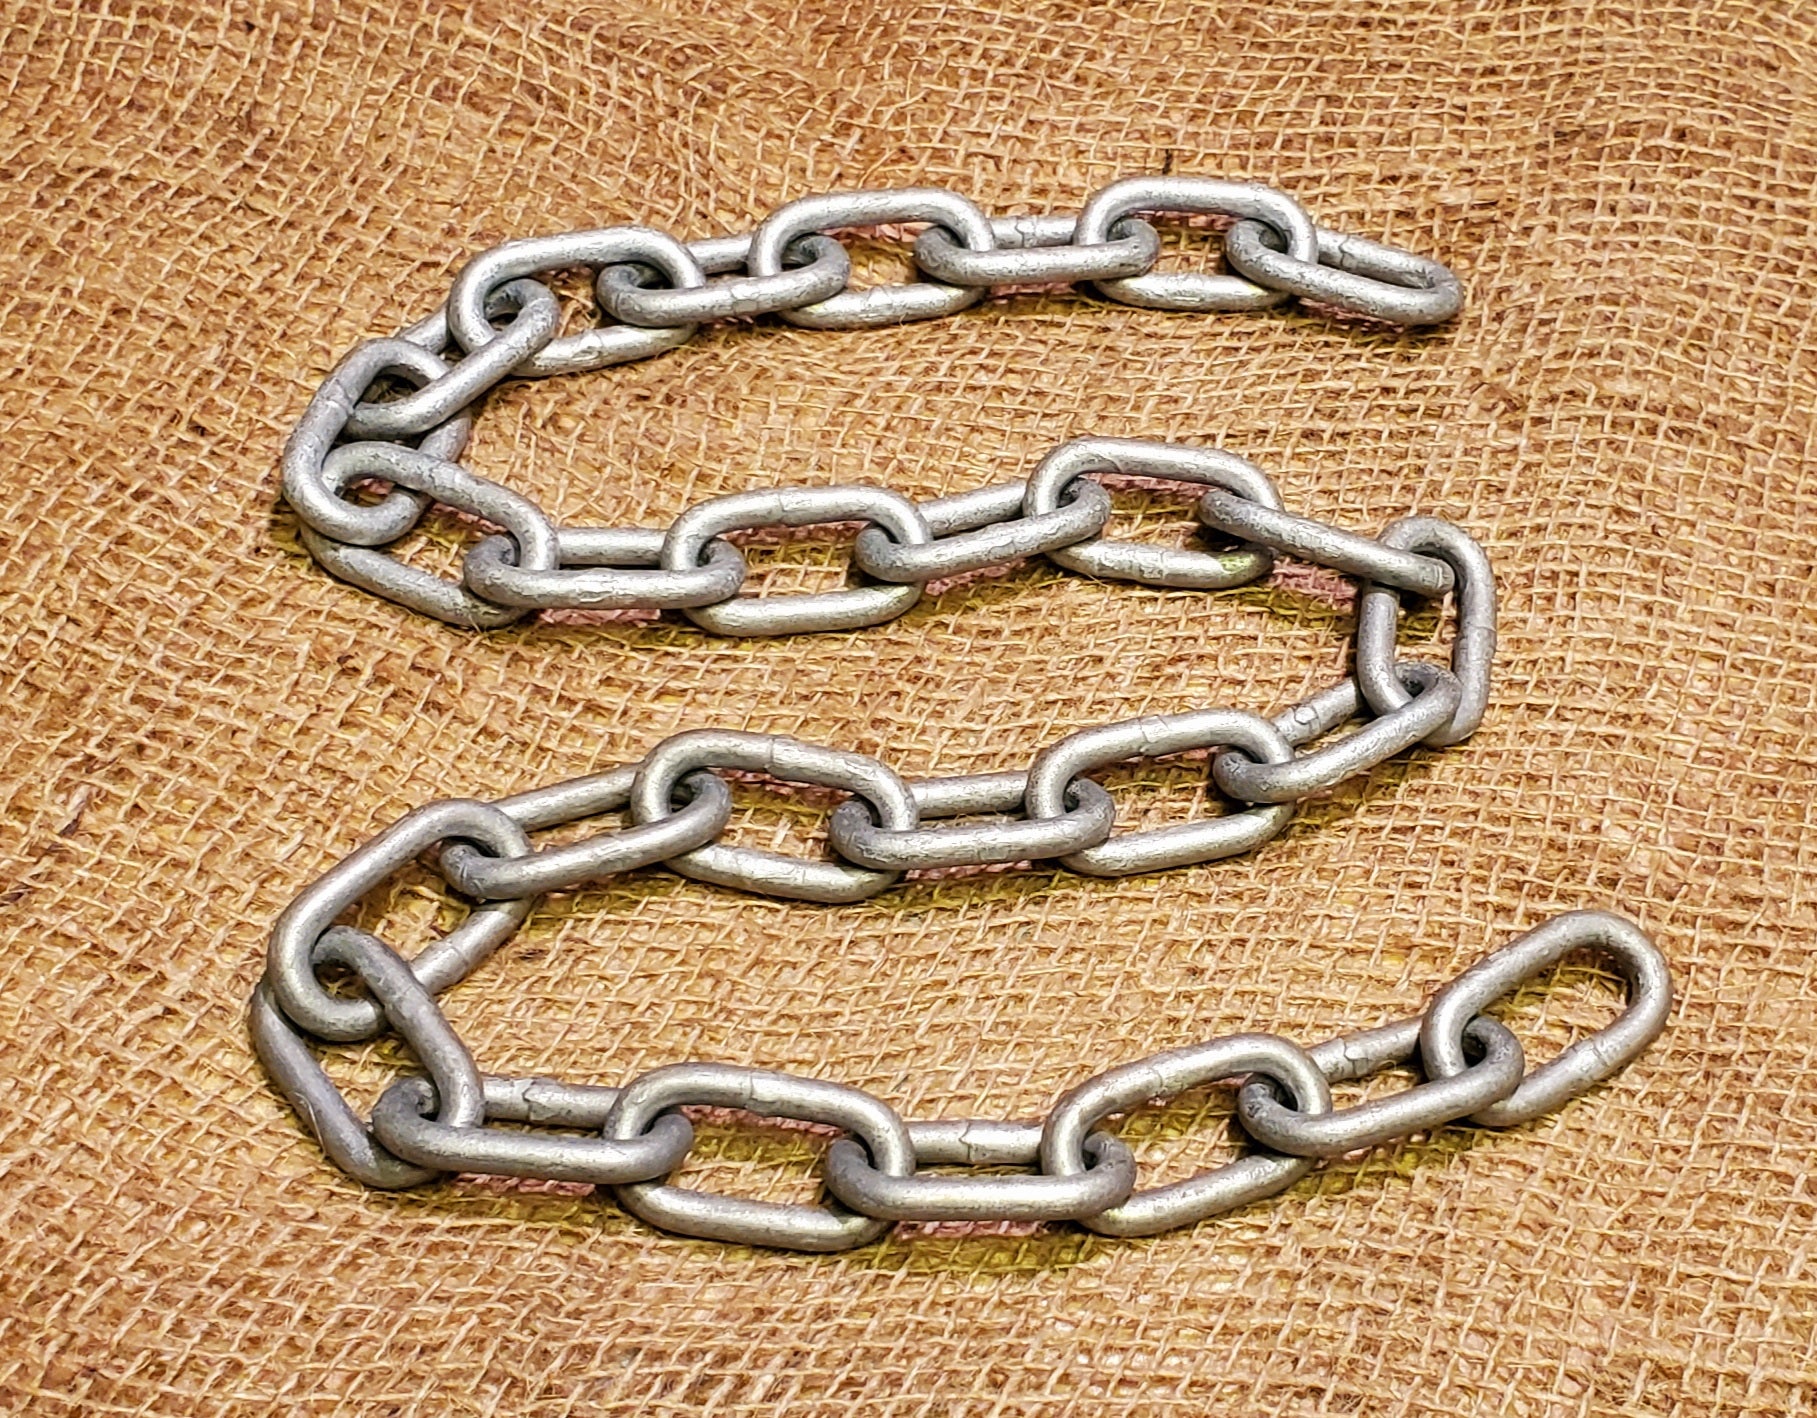 Chain - 6mm 1/4" x 36" Galvanized Steel - Spearhead Collection - Padlocks, Keys & Chains - Chains, Hardware